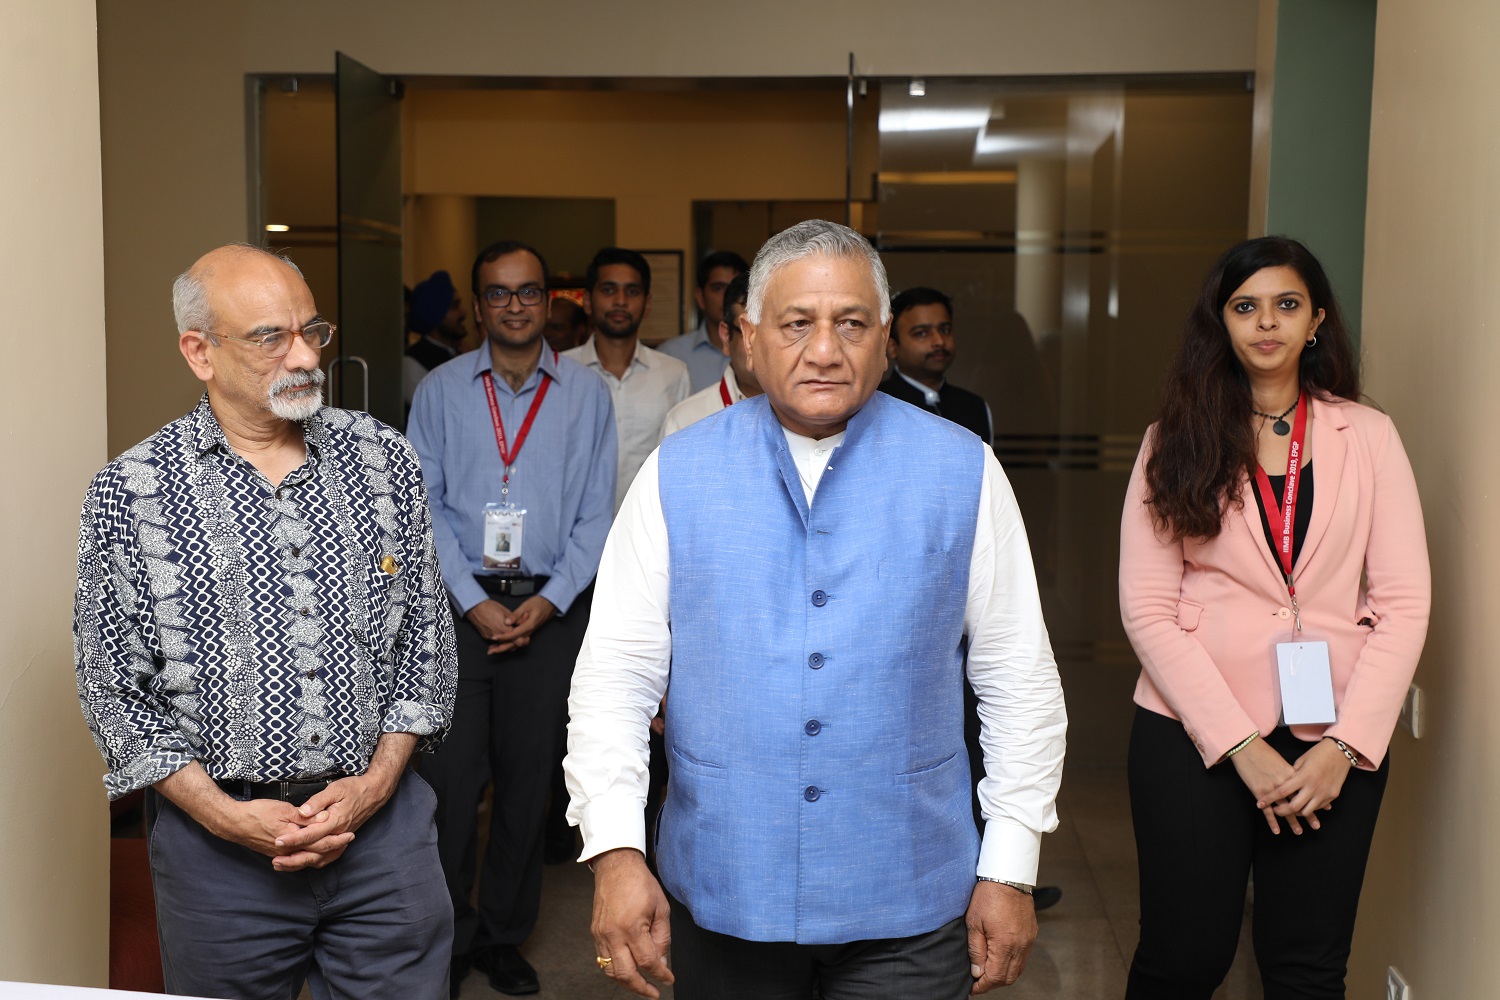 (Left) IIMB Director Professor G Raghuram with General (Dr.) Vijay Kumar Singh, PVSM, AVSM, YSM (Retd.), Union Minister of State for Road Transport and Highways, on the eve of the IIMB Business Conclave, on 21st September, 2019.